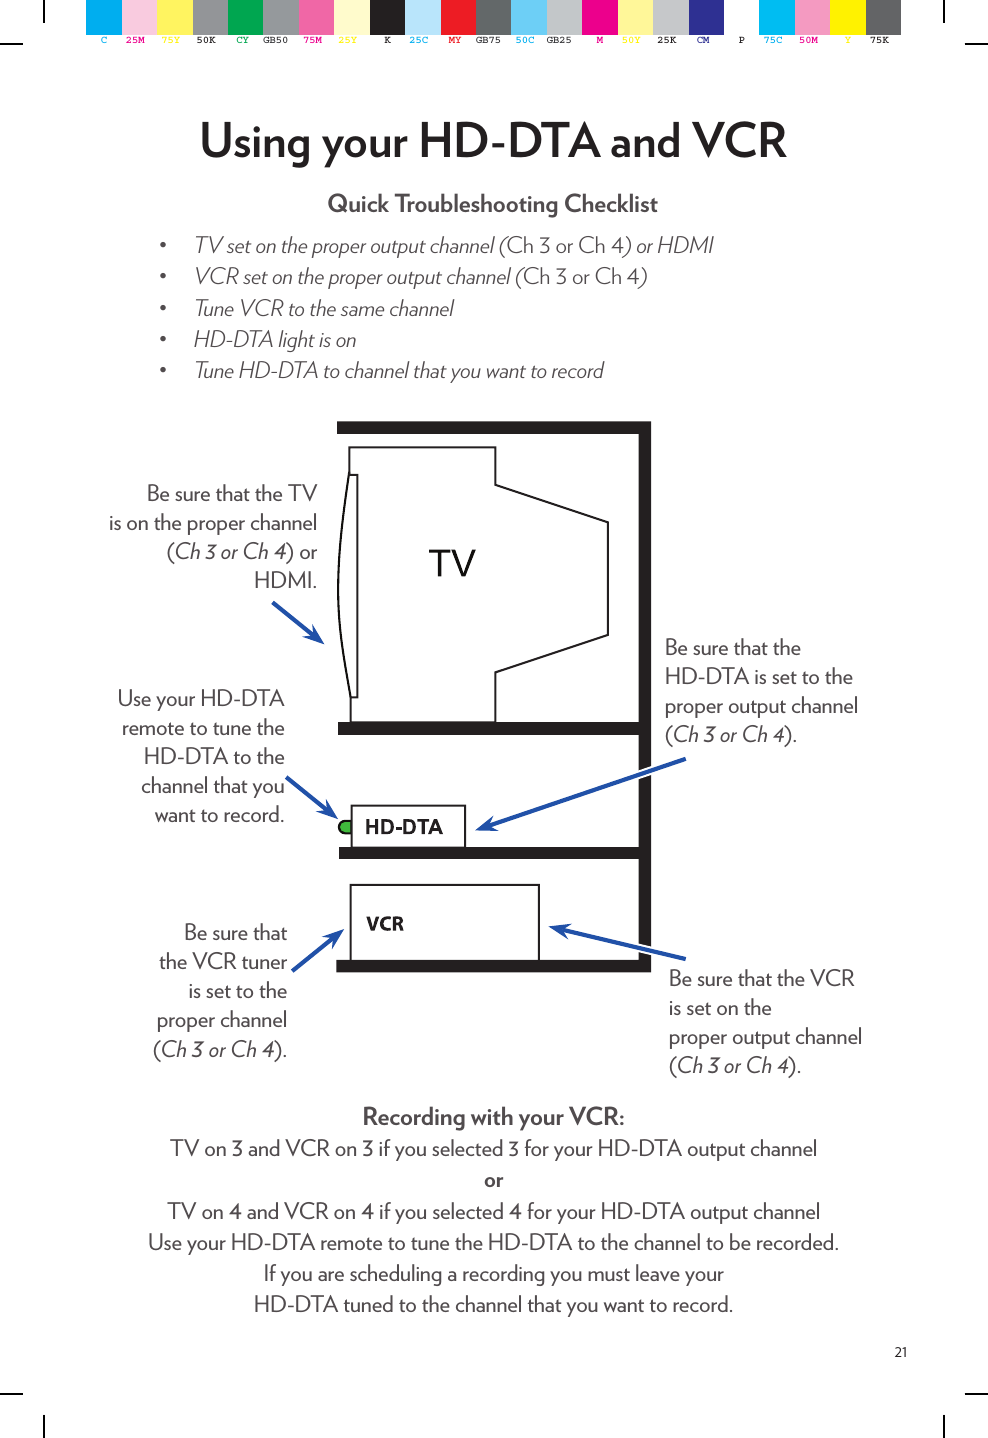 21Using your HD-DTA and VCRQuick Troubleshooting Checklist• TVsetontheproperoutputchannel(Ch 3 or Ch 4)orHDMI• VCRsetontheproperoutputchannel(Ch 3 or Ch 4)• TuneVCRtothesamechannel• HD-DTAlightison• TuneHD-DTAtochannelthatyouwanttorecordUse your HD-DTA remote to tune the HD-DTA to the channel that you want to record.Be sure that the TV  is on the proper channel (Ch 3 or Ch 4) or HDMI.Be sure that the  HD-DTA is set to the proper output channel  (Ch 3 or Ch 4).Be sure that the VCR is set on the  proper output channel (Ch 3 or Ch 4).Be sure that  the VCR tuner  is set to the  proper channel  (Ch 3 or Ch 4).Recording with your VCR:TV on 3 and VCR on 3 if you selected 3 for your HD-DTA output channelorTV on 4 and VCR on 4 if you selected 4 for your HD-DTA output channelUse your HD-DTA remote to tune the HD-DTA to the channel to be recorded.If you are scheduling a recording you must leave your  HD-DTA tuned to the channel that you want to record.C25M 75Y 50K CY GB50 75M 25Y K25C MY GB75 50C GB25 M50Y 25K CM P75C 50M Y75K